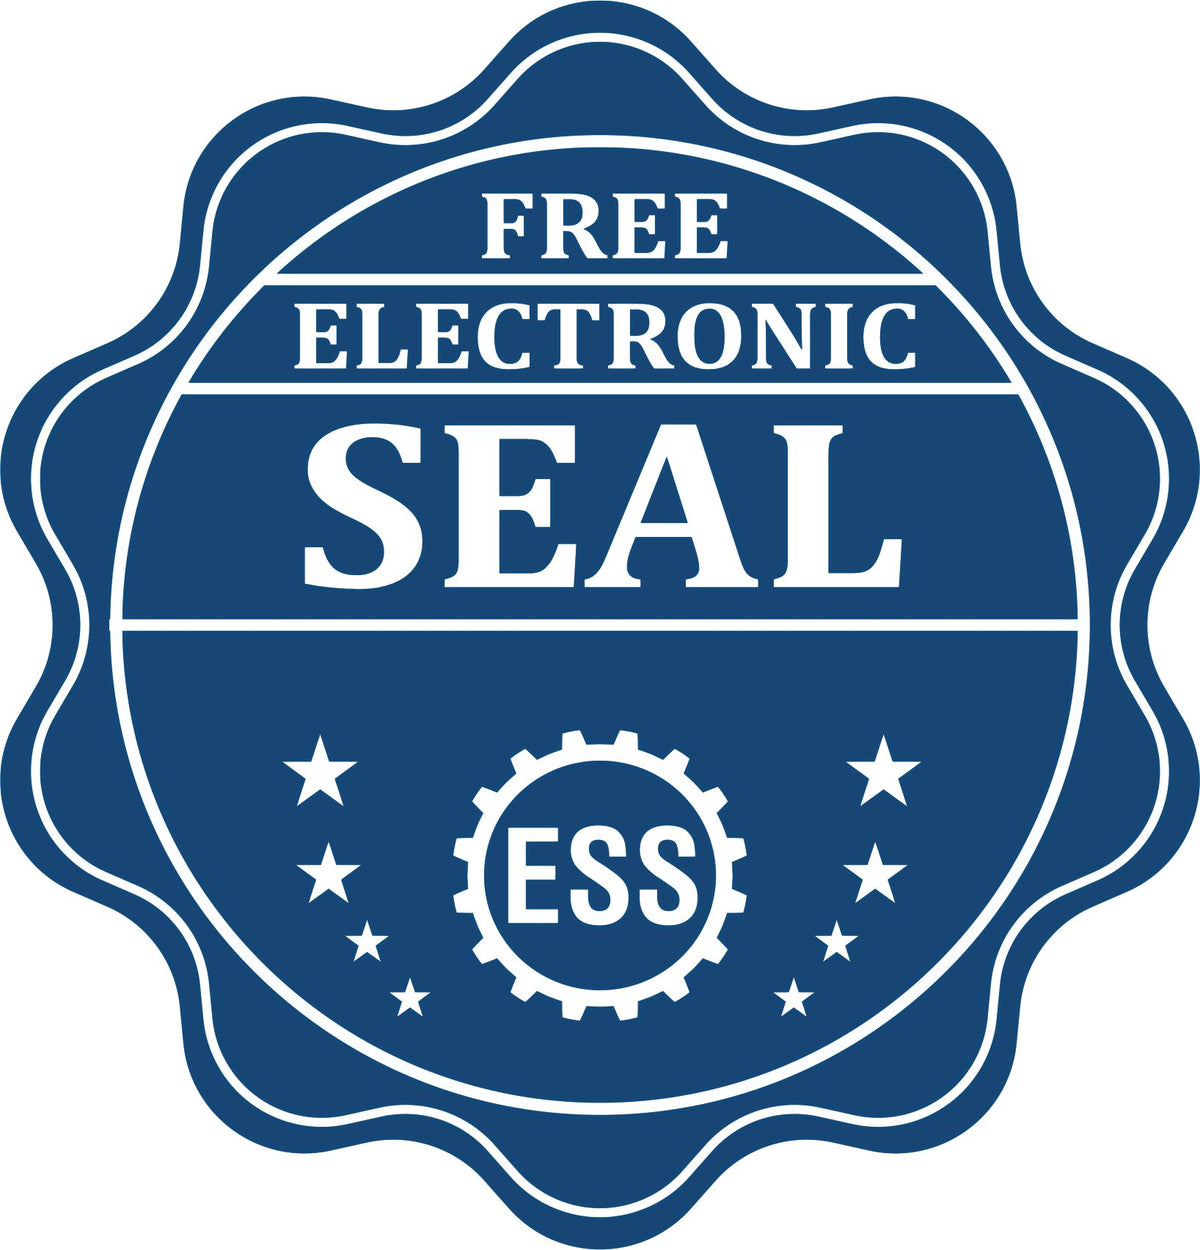 A badge showing a free electronic seal for the Long Reach Illinois PE Seal with stars and the ESS gear on the emblem.